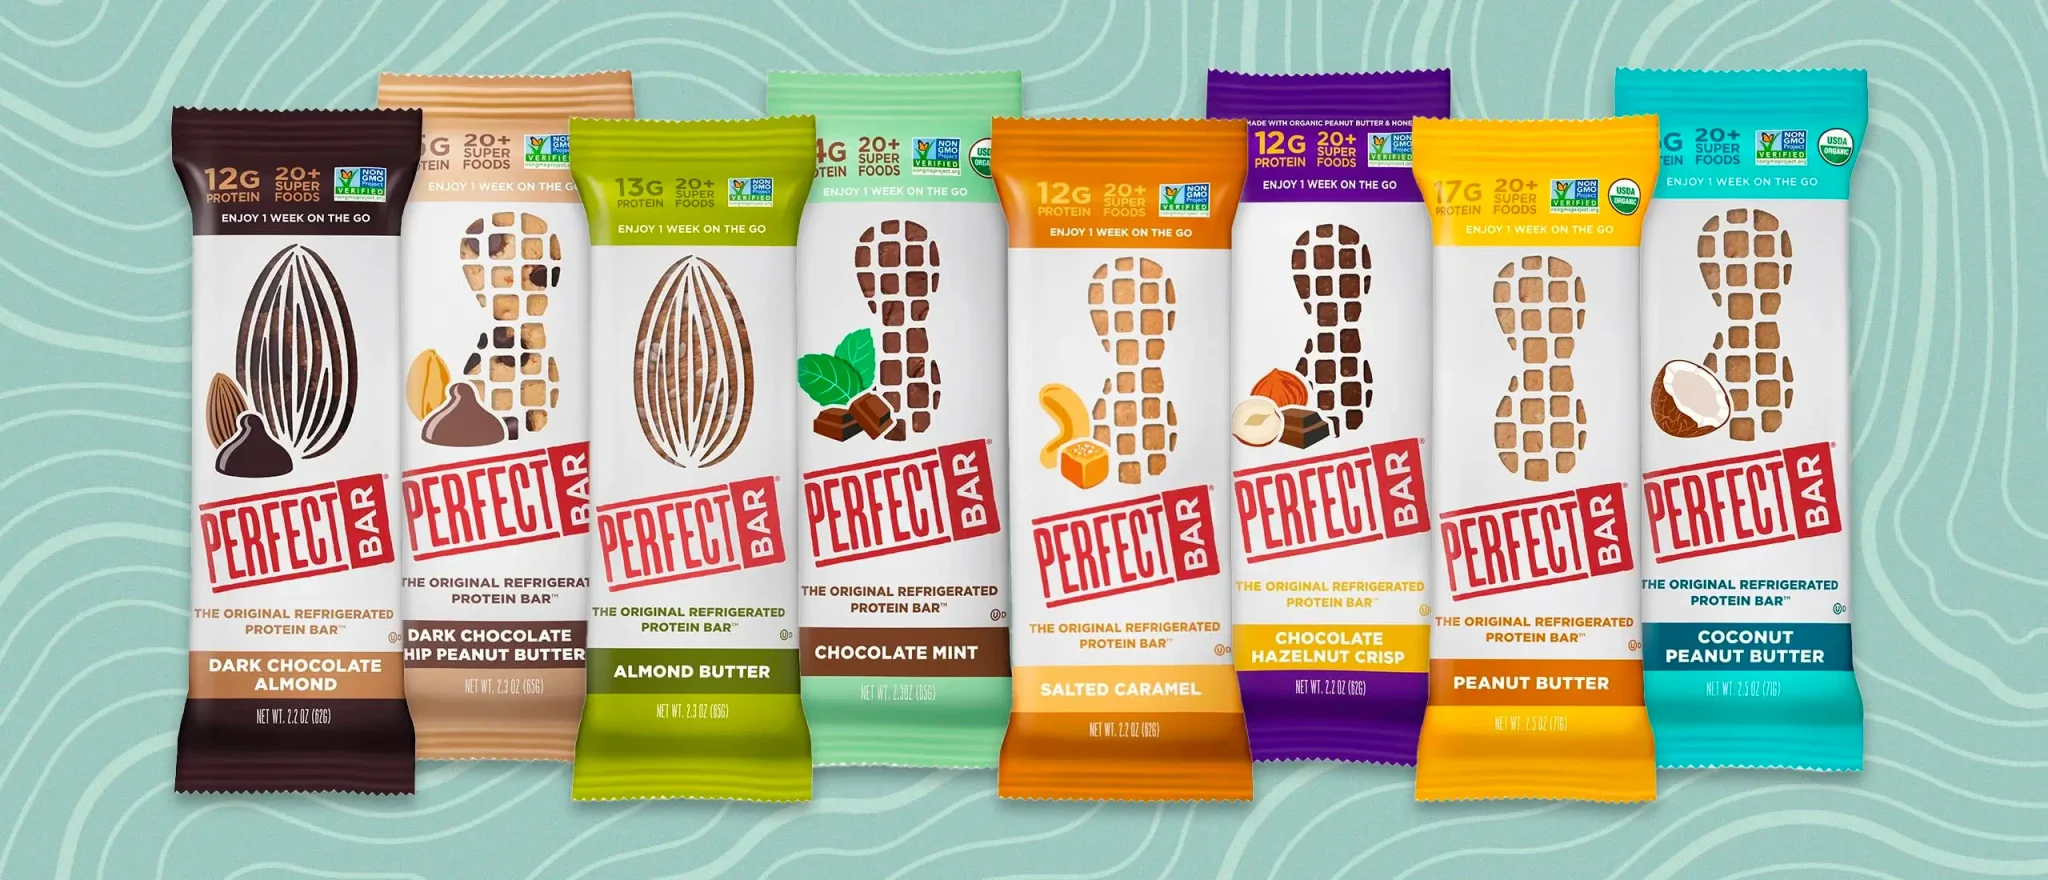 Are Perfect Bars Healthy? A Registered Dietitian Weighs In